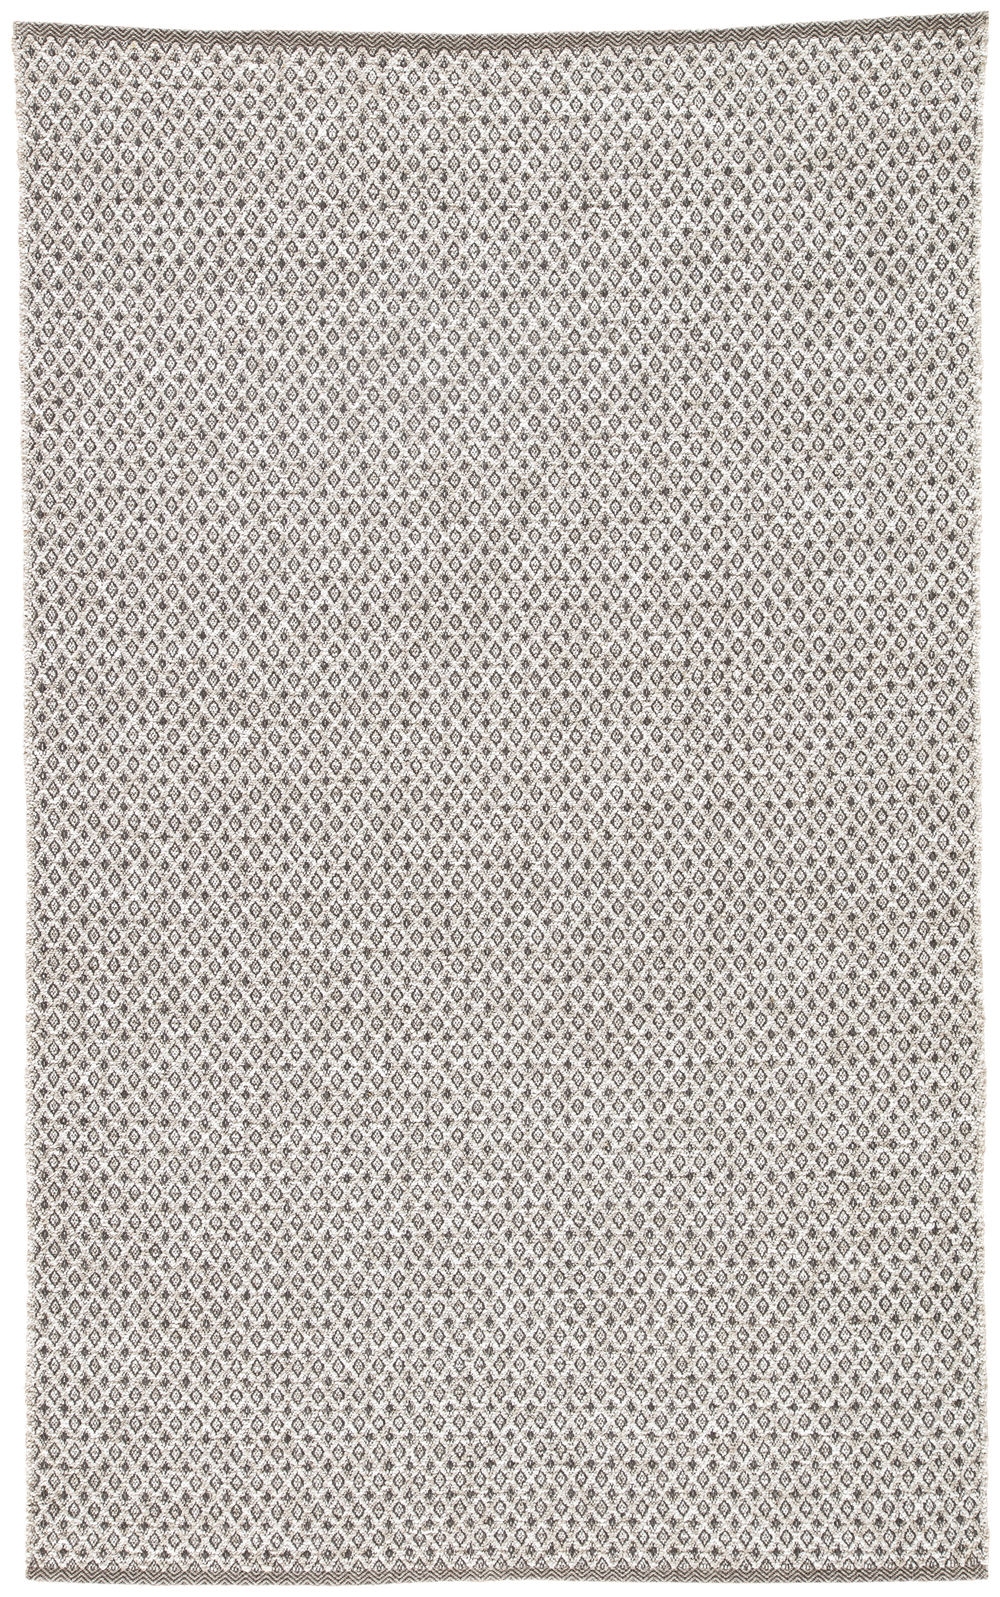 Kali Indoor/Outdoor Rug, Gray and White 10'x14' - Image 0